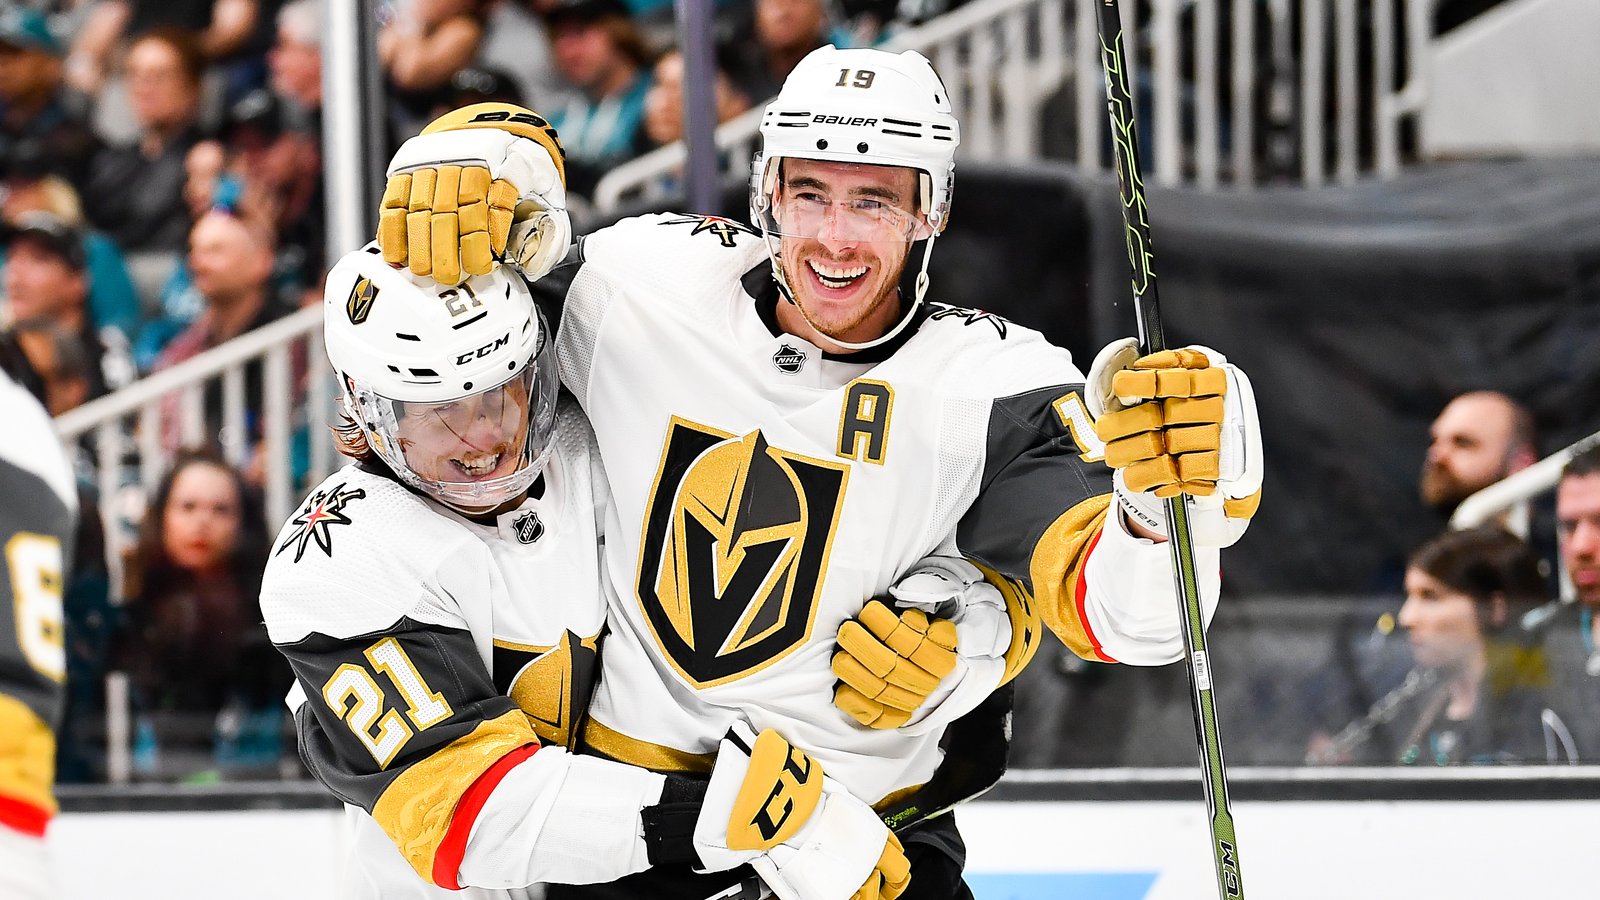 The Golden Knights keep their lineup intact for second of back-to-back games